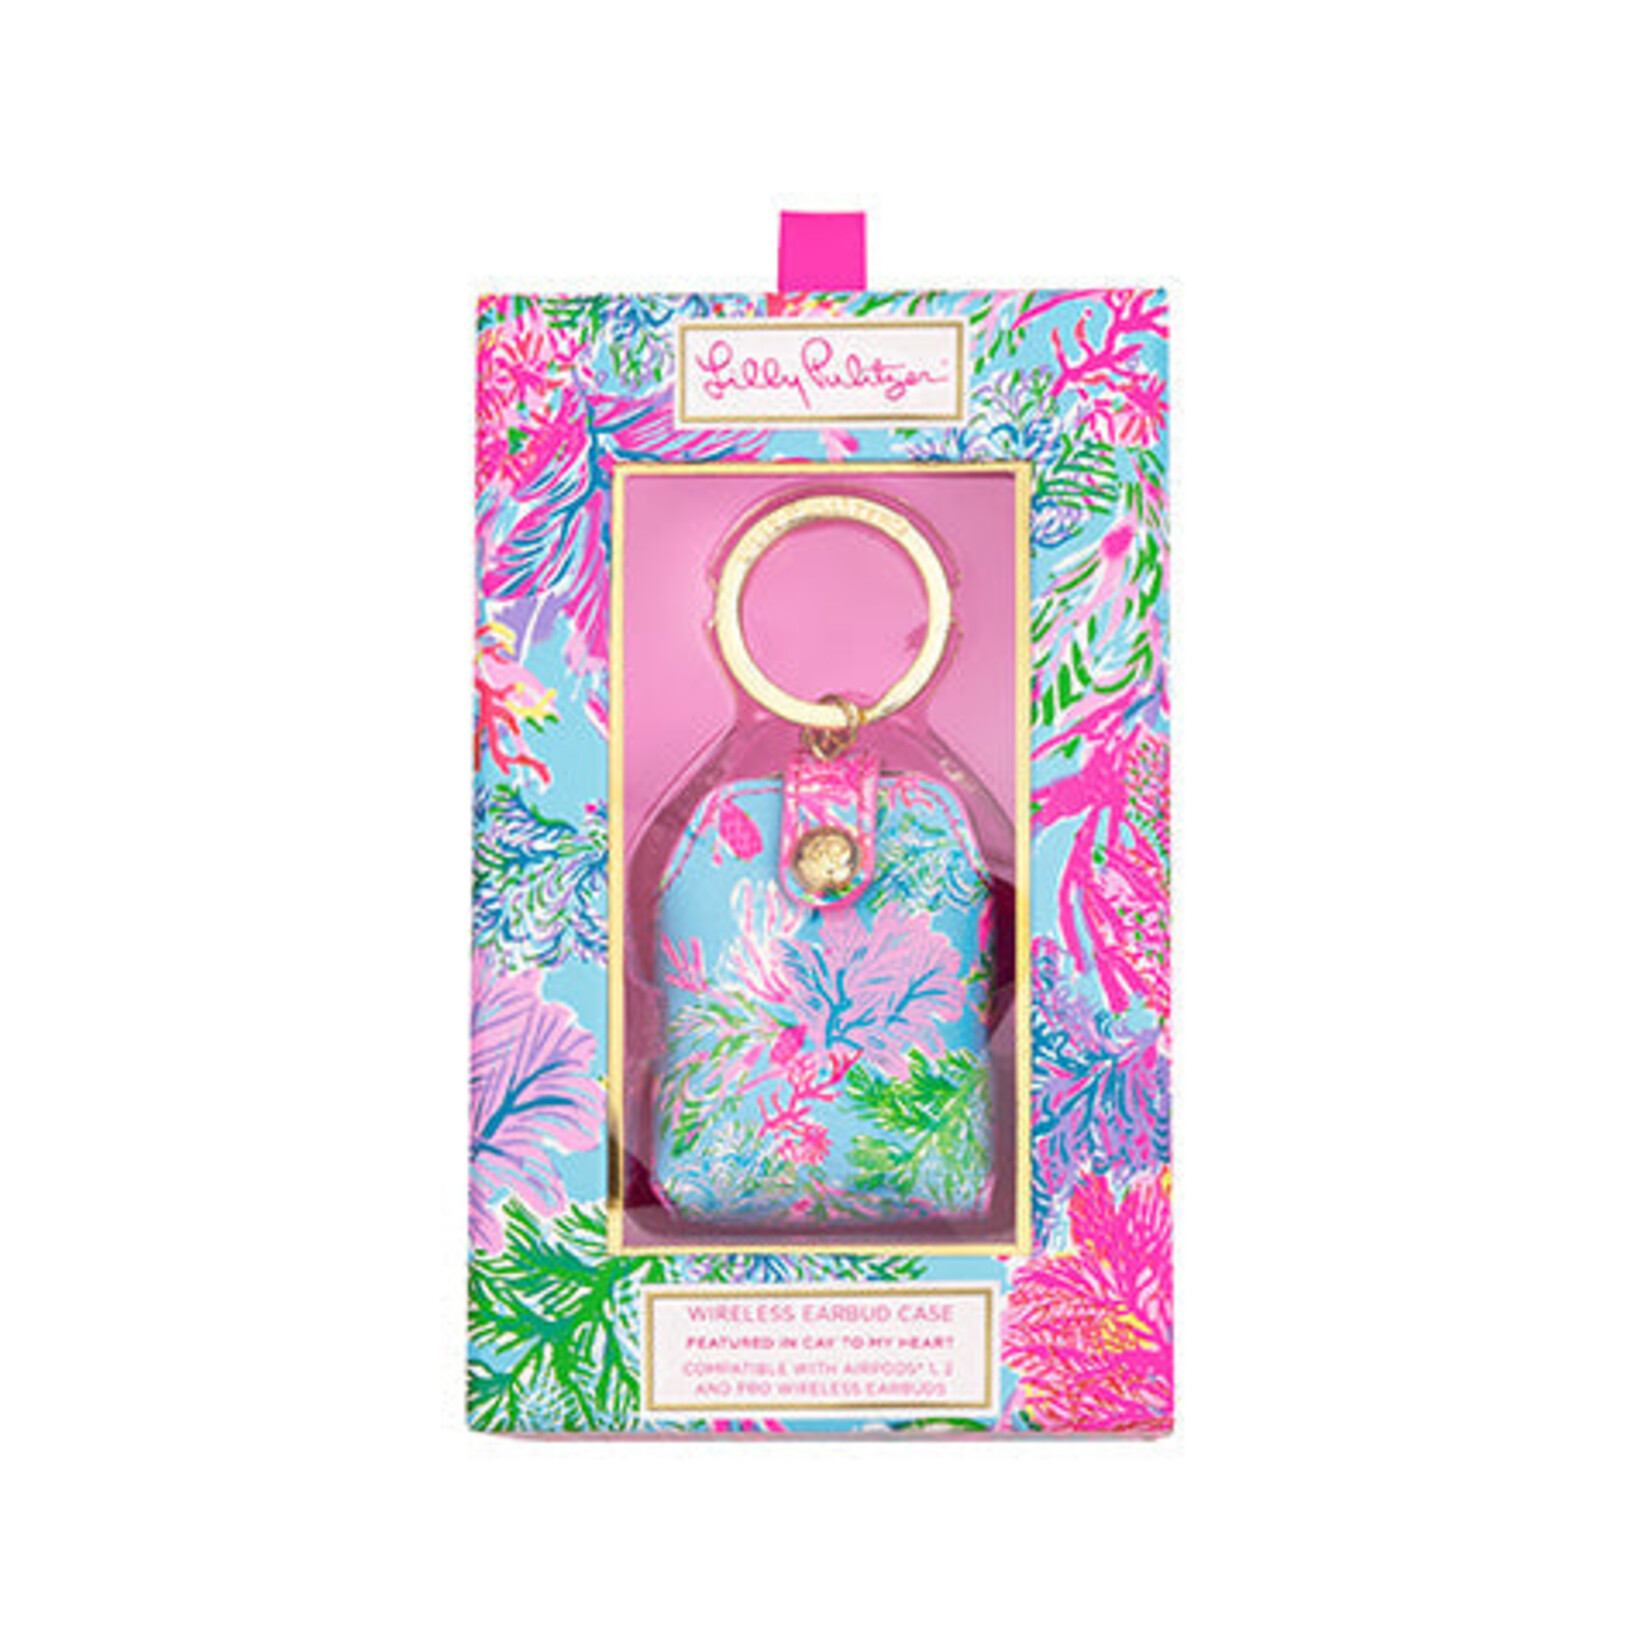 Lilly Pulitzer Lilly Pulitzer Wireless Earbud Case-Cay To My Heart